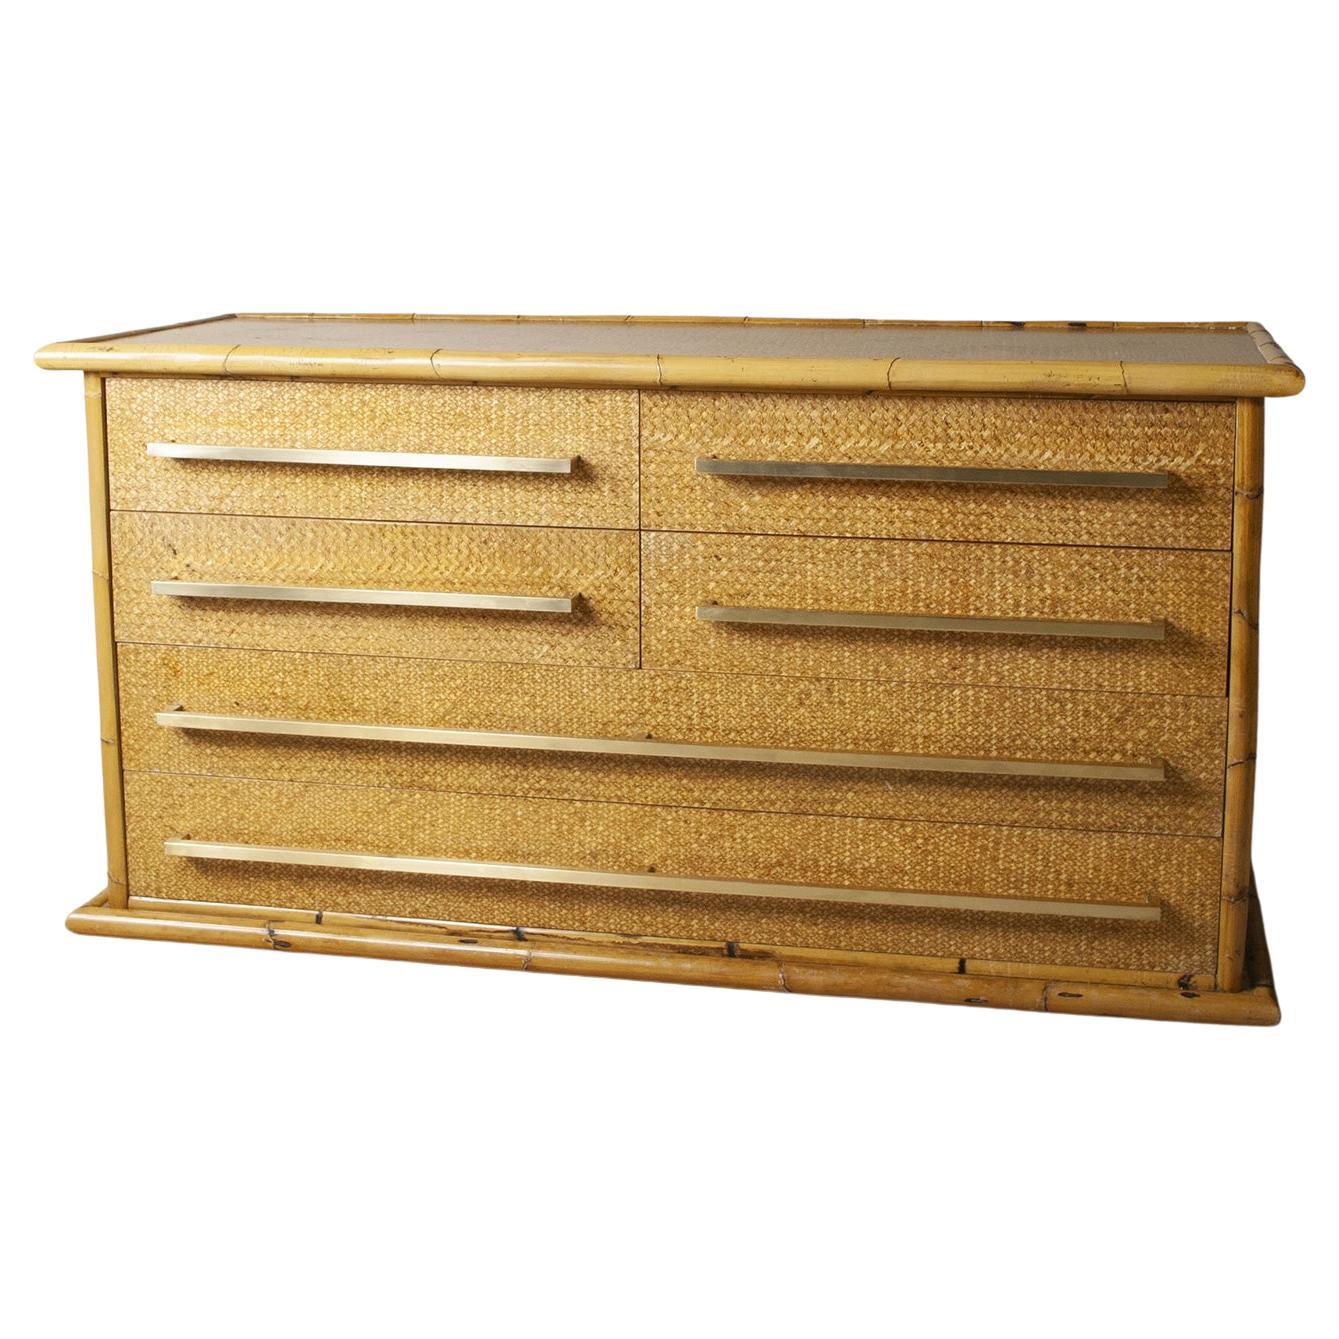 Italian Midcentury Bamboo Sideboard from the Sixties For Sale